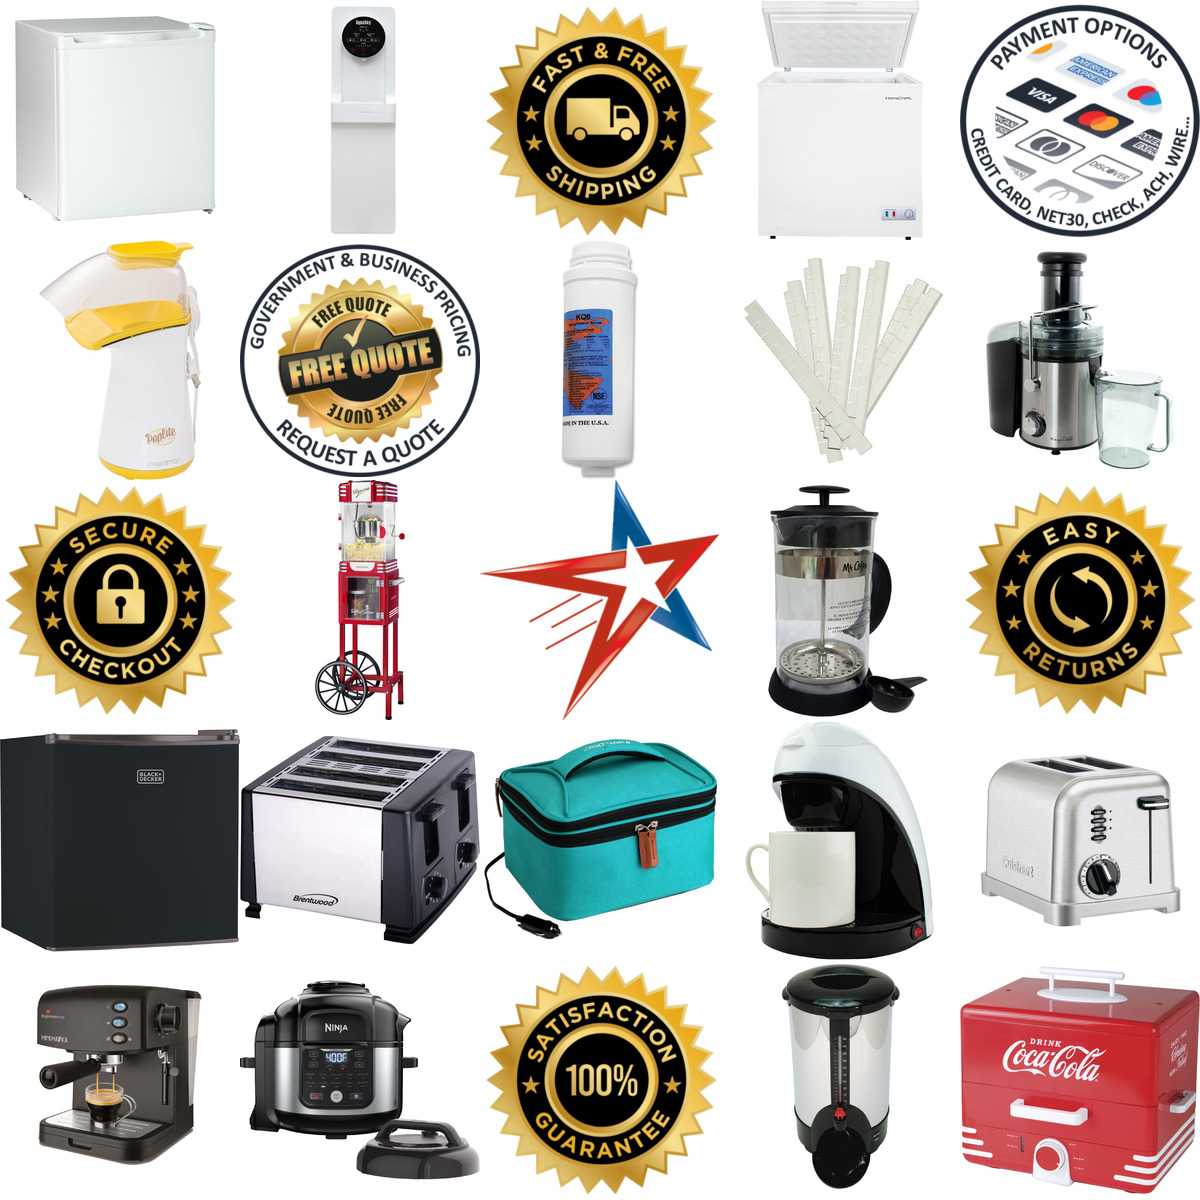 A selection of Kitchen products on GoVets